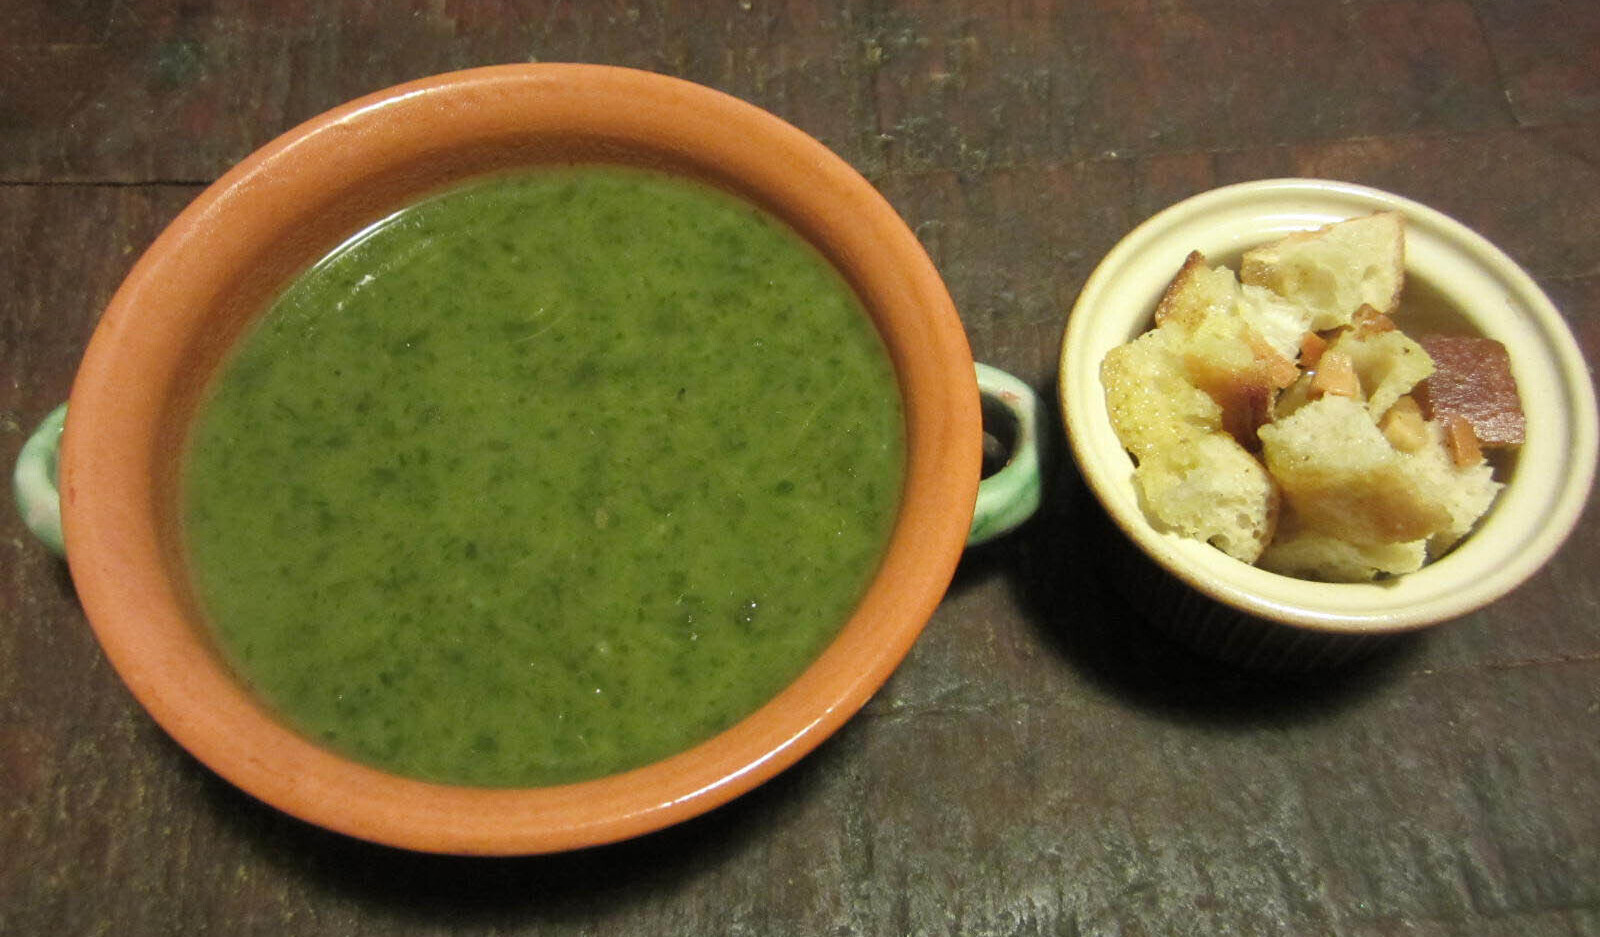 Bowl of leafy greens soup with garlic croutons on the side